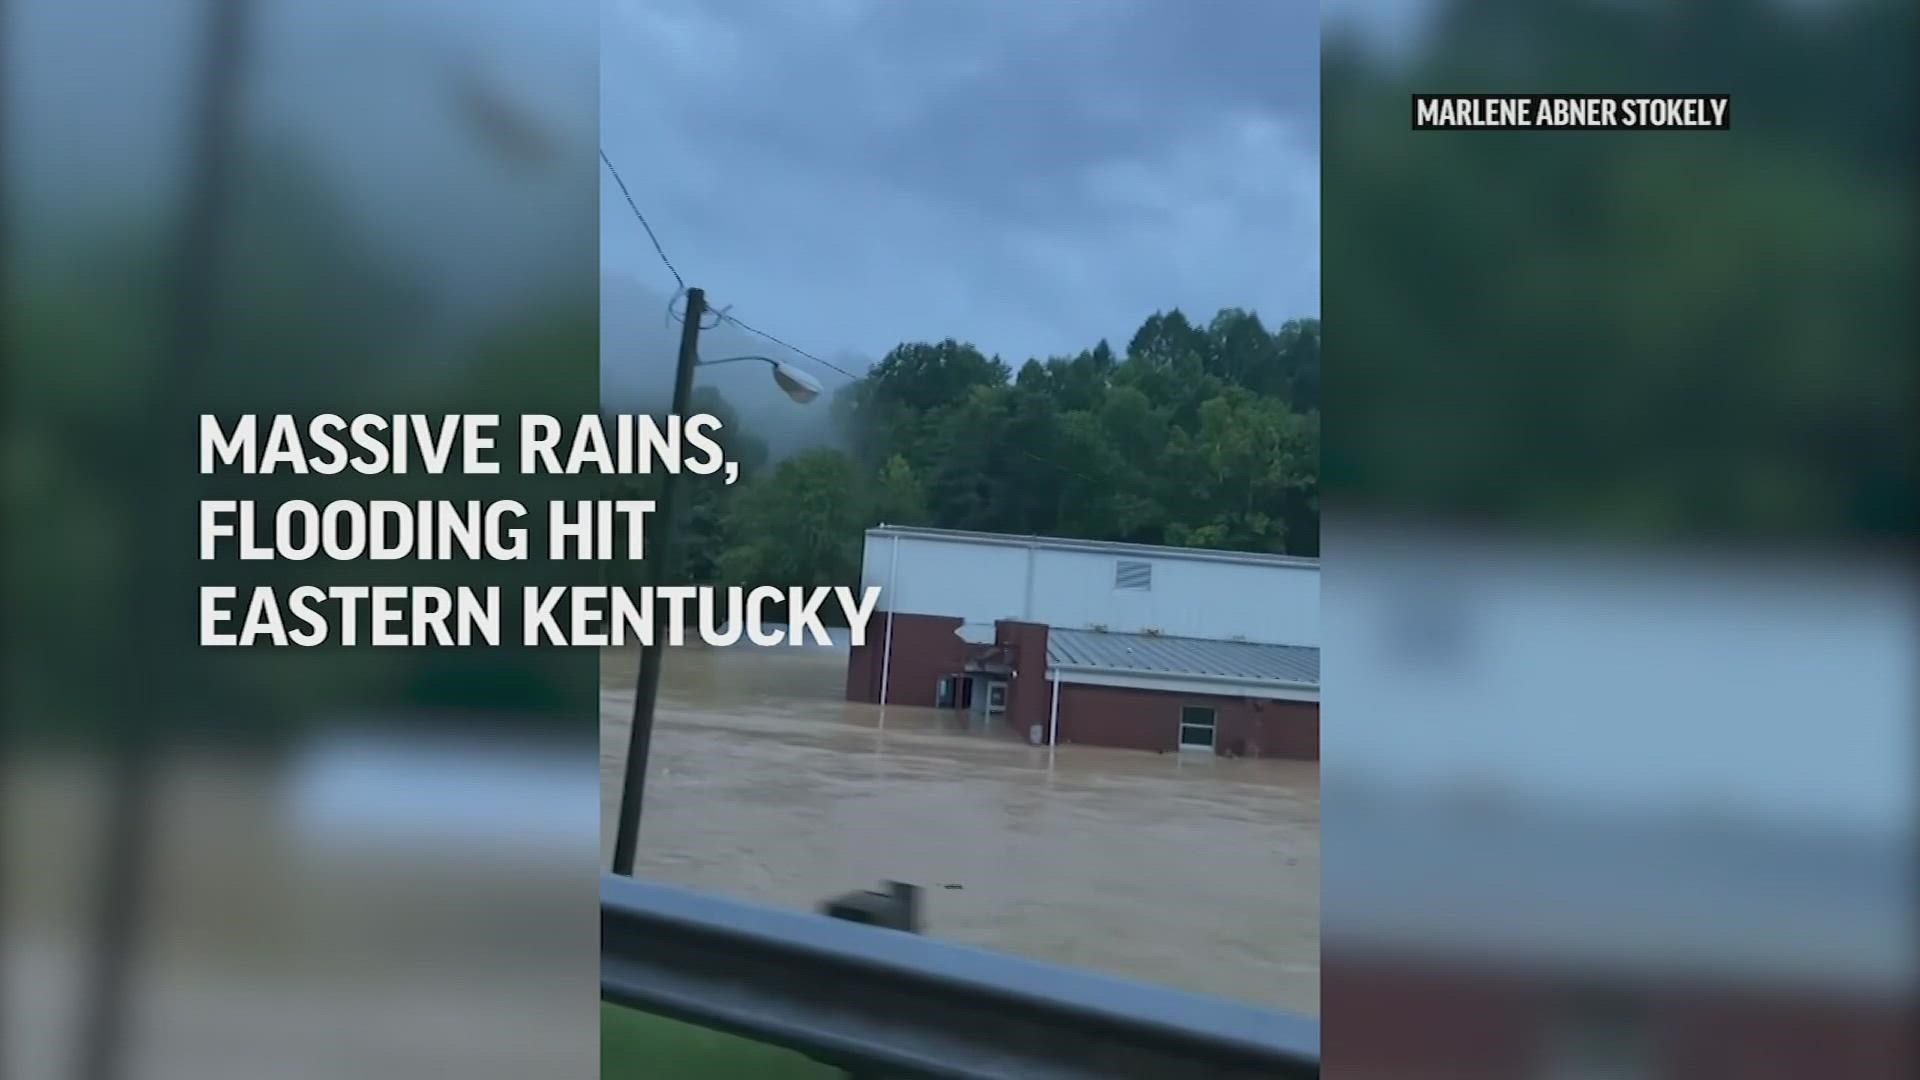 Trapped homeowners swam to safety and others were rescued by boat as record flash flooding killed at least 16 people in eastern Kentucky.